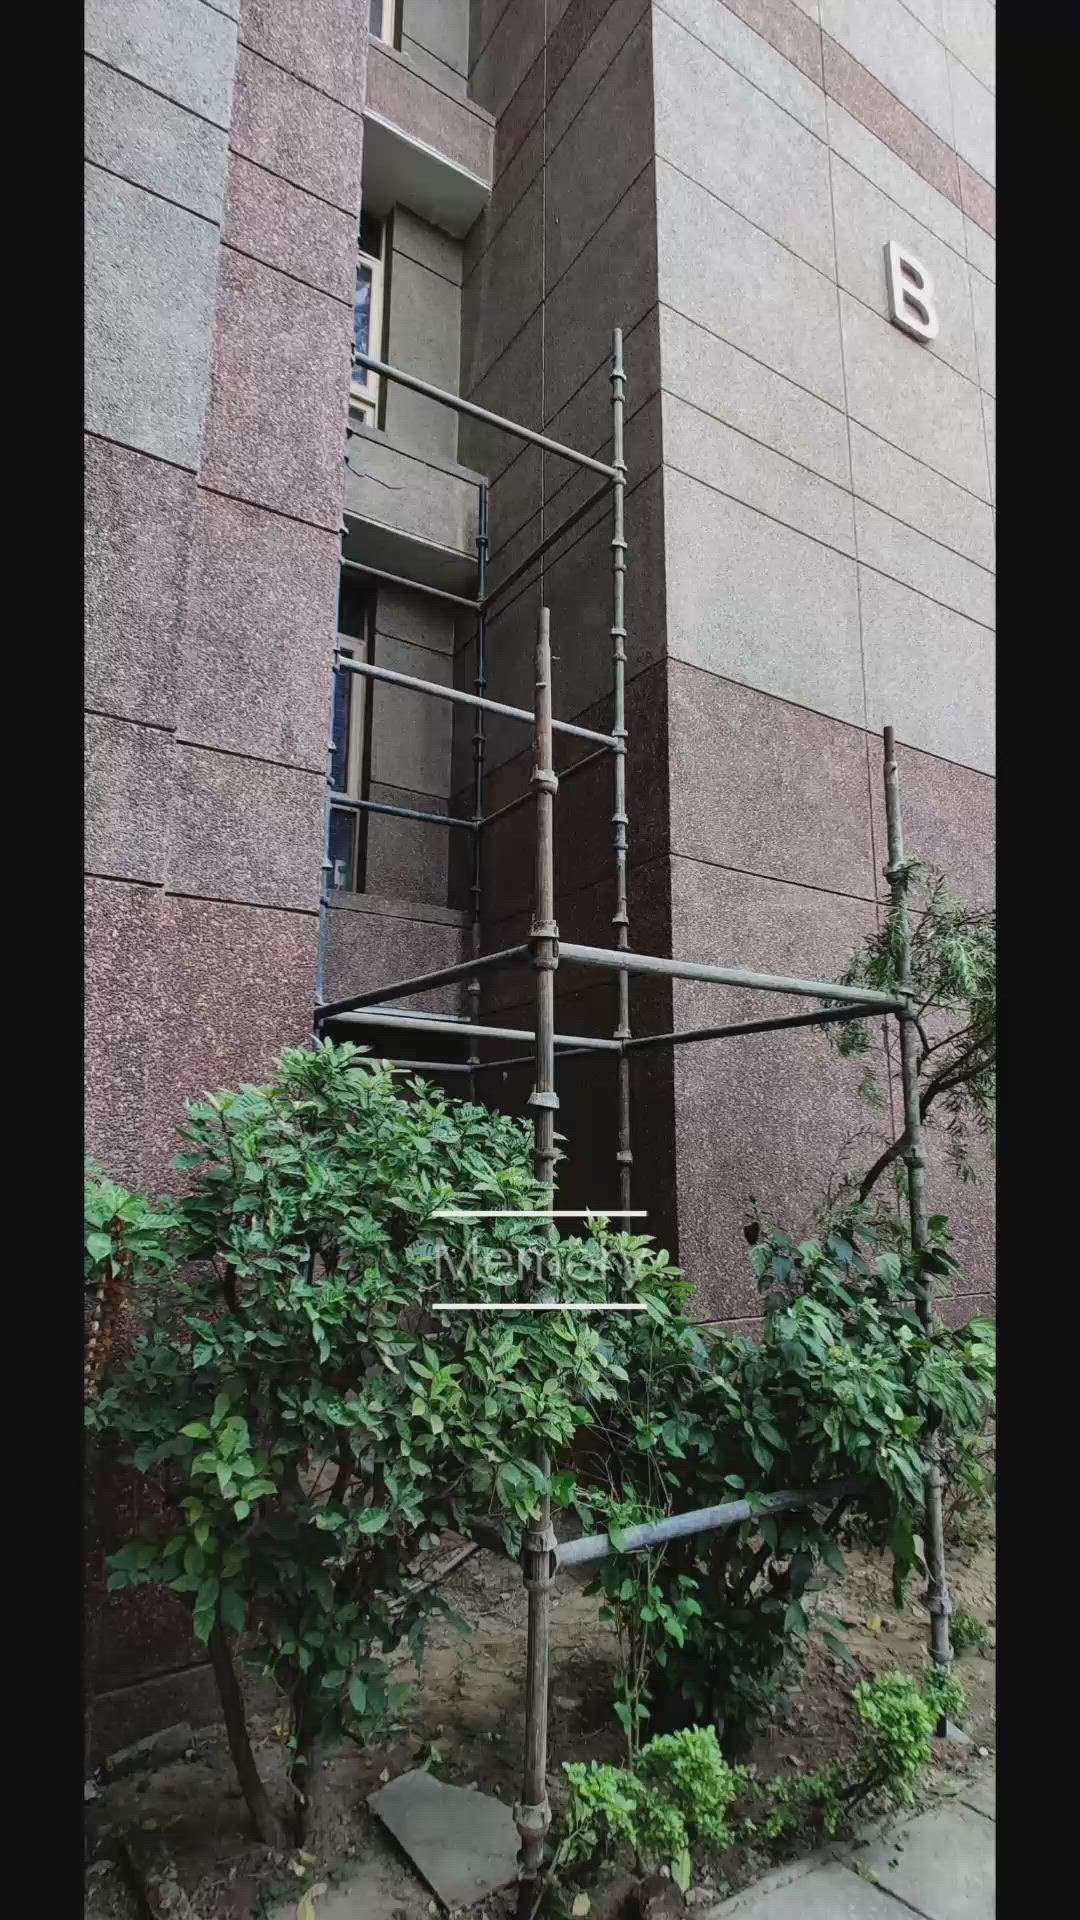 #scaffolding
scaffolding available on rent